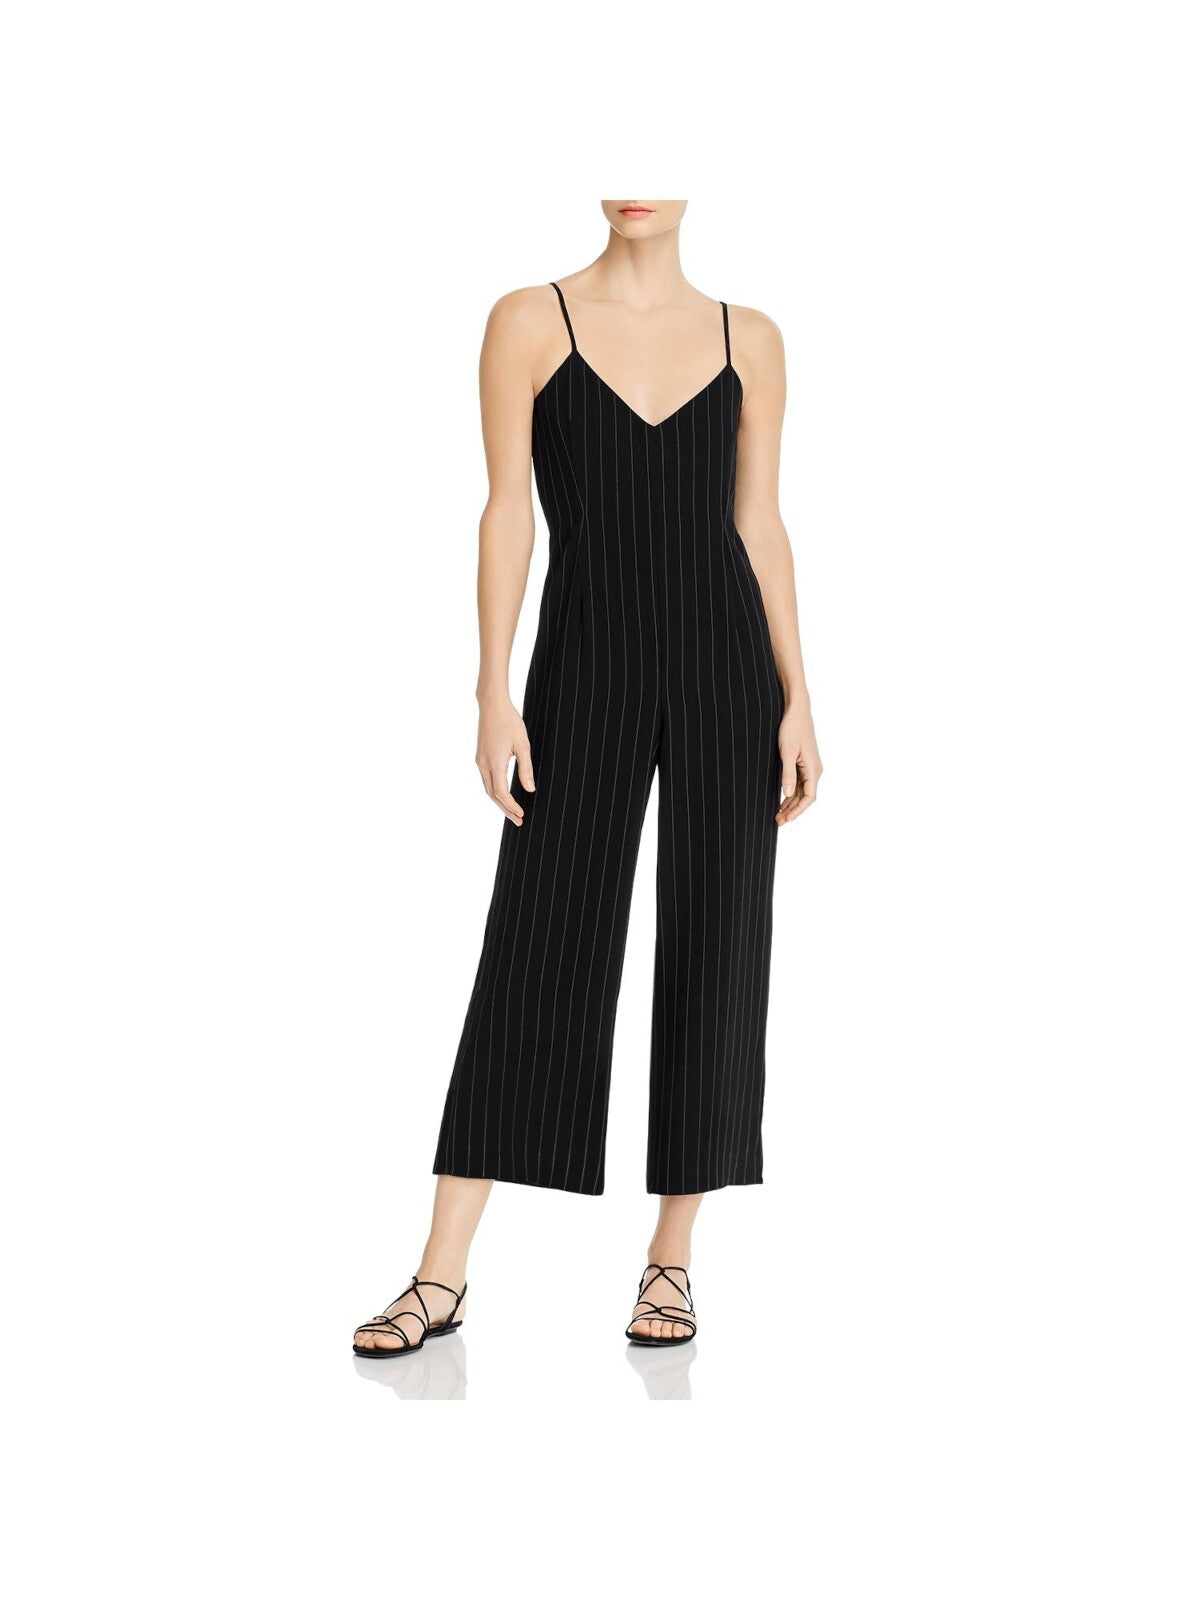 CUPCAKES AND CASHMERE Womens Black Zippered Back V-neck Pinstripe Spaghetti Strap V Neck Cropped Jumpsuit S